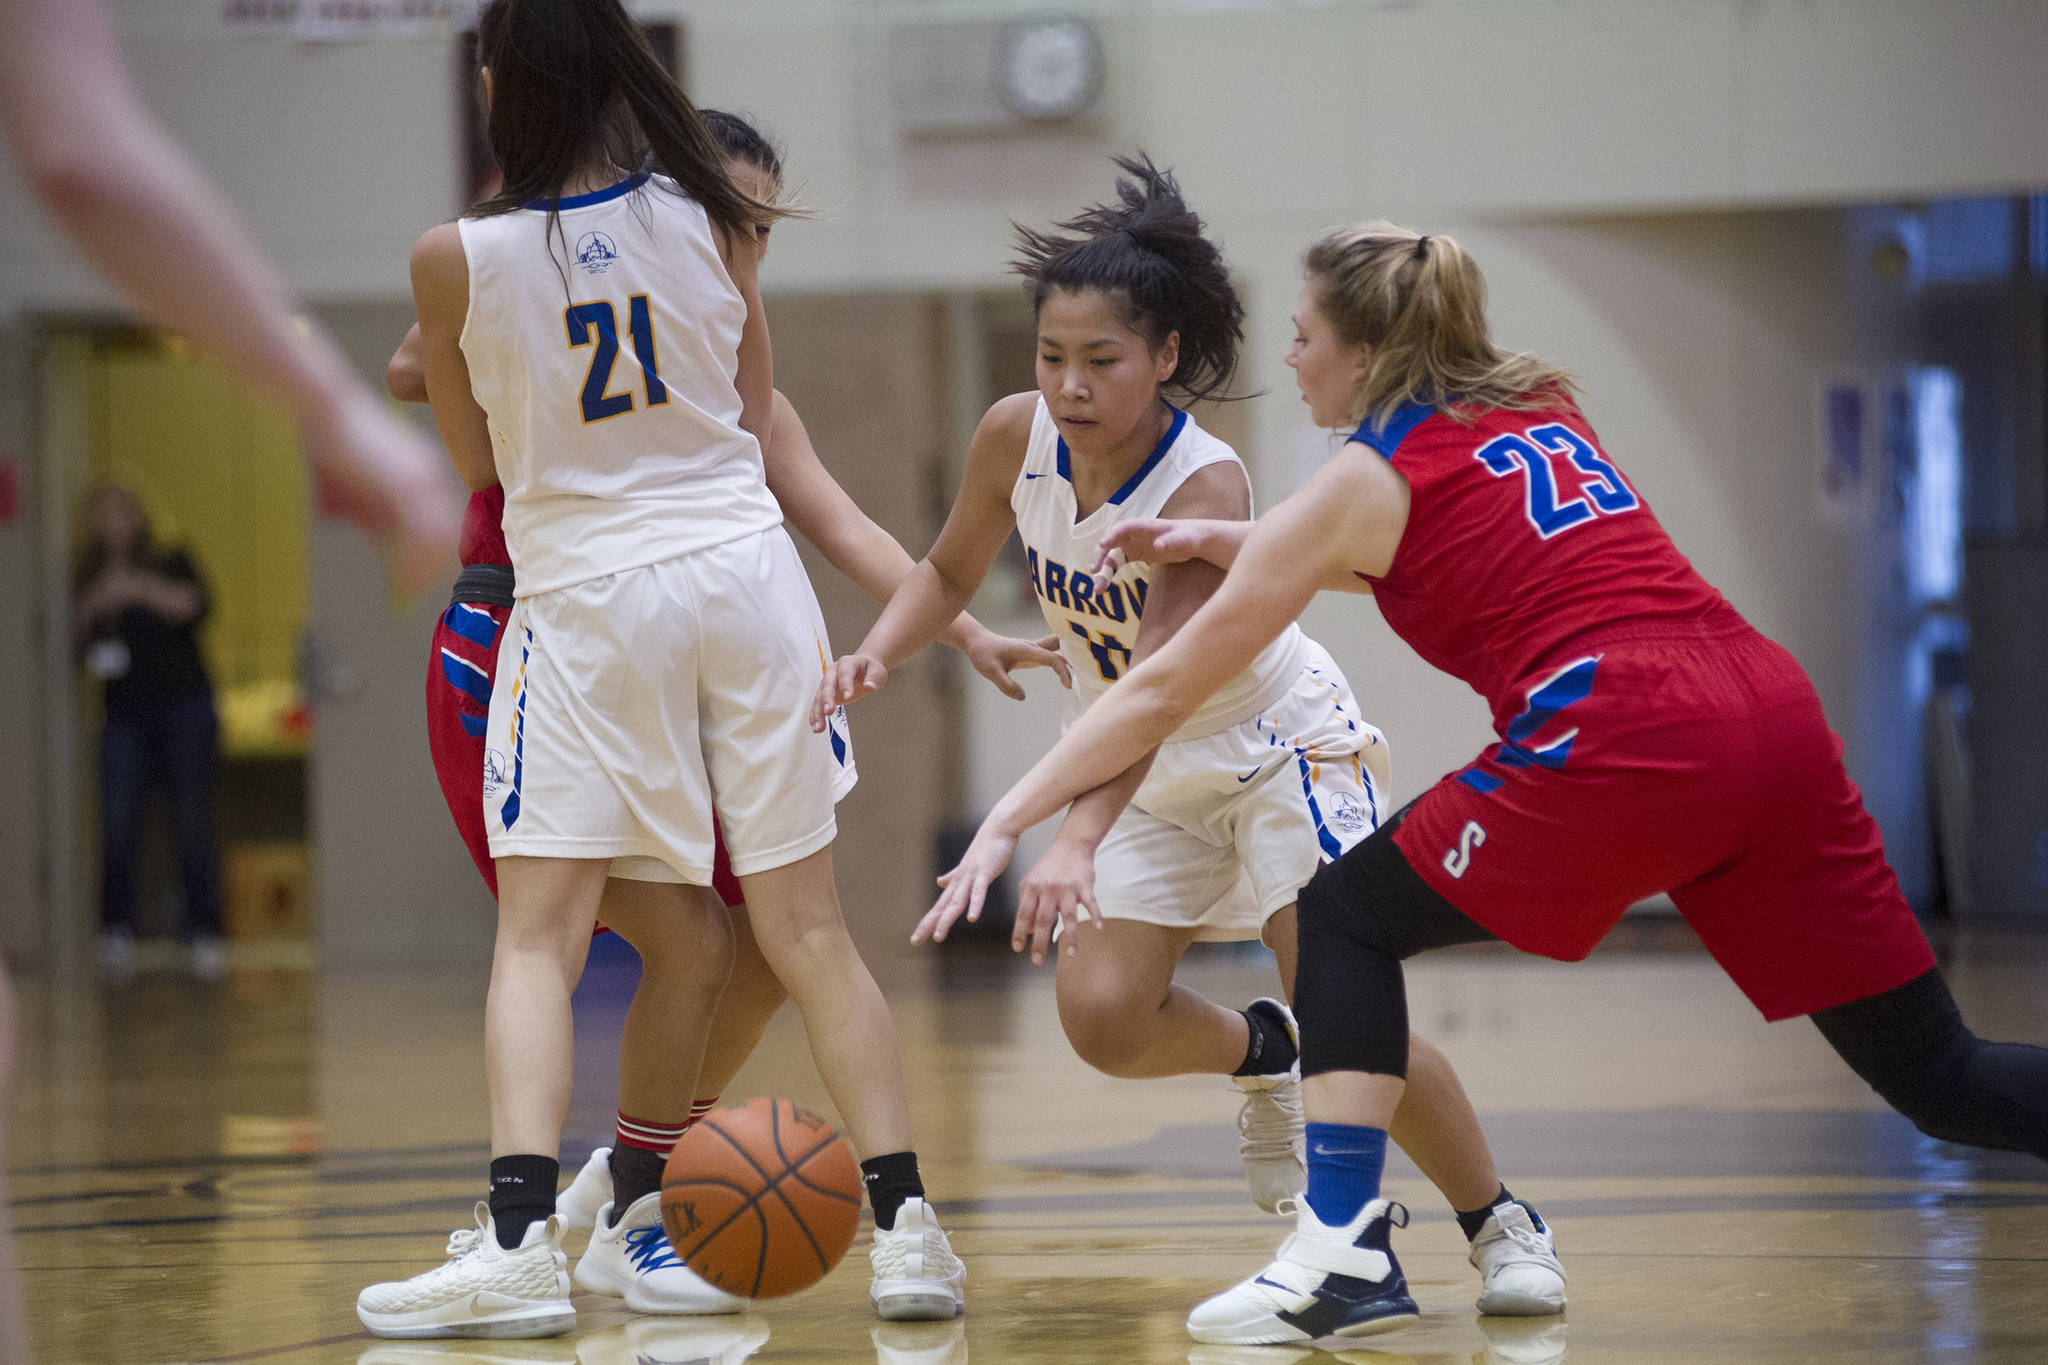 Barrow’s Lewanne Brower dribbles the ball in between teammate Jenilee Donovan and Sitka’s Abby Forrester at the Princess Cruises Capital City Classic at Juneau-Douglas High School on Saturday, Dec. 29, 2018. Barrow won 58-50. (Nolin Ainsworth | Juneau Empire)